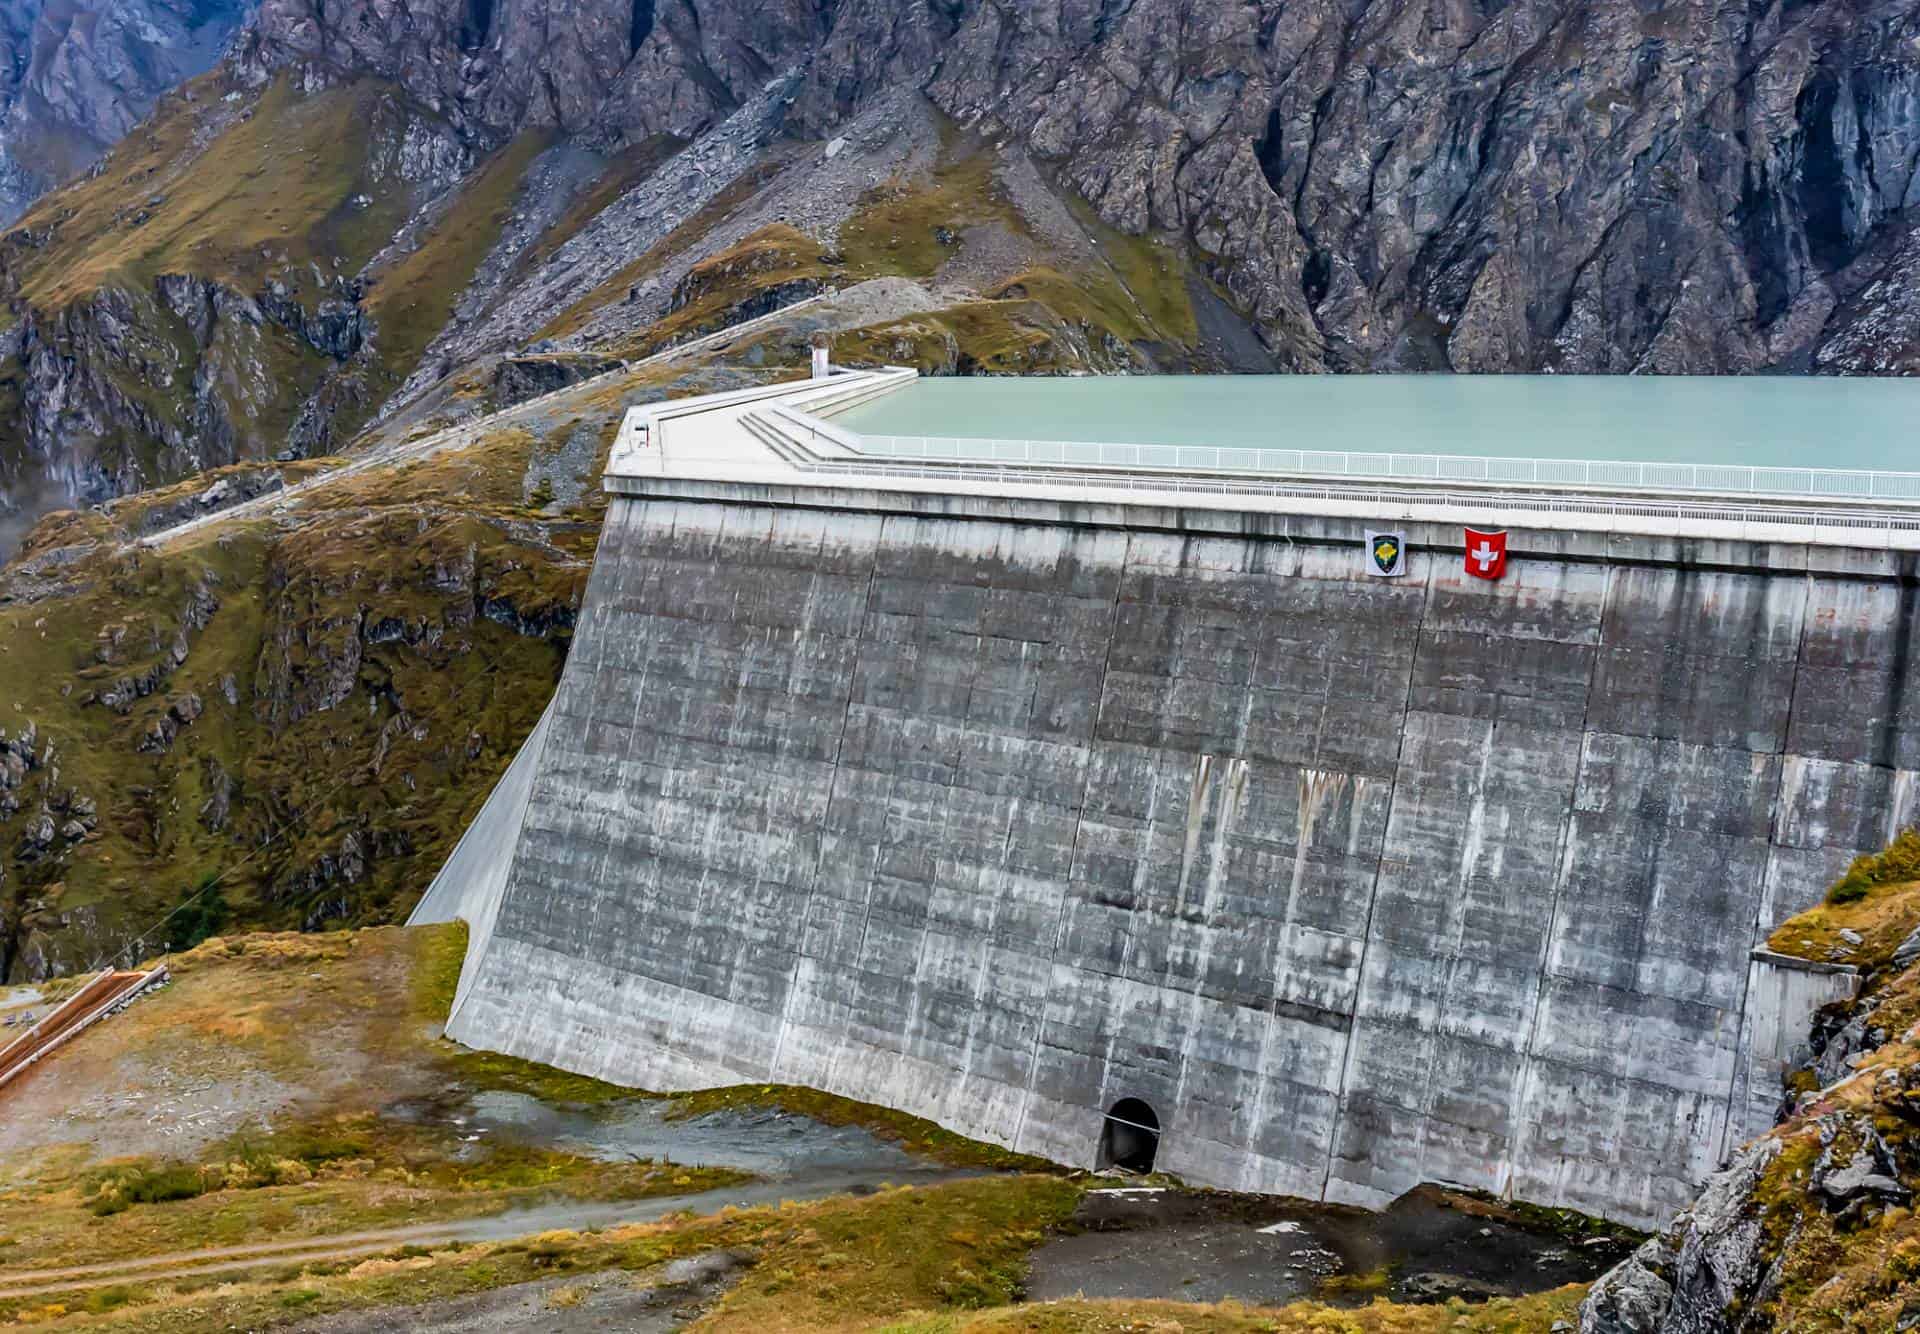 What’s the highest dam?